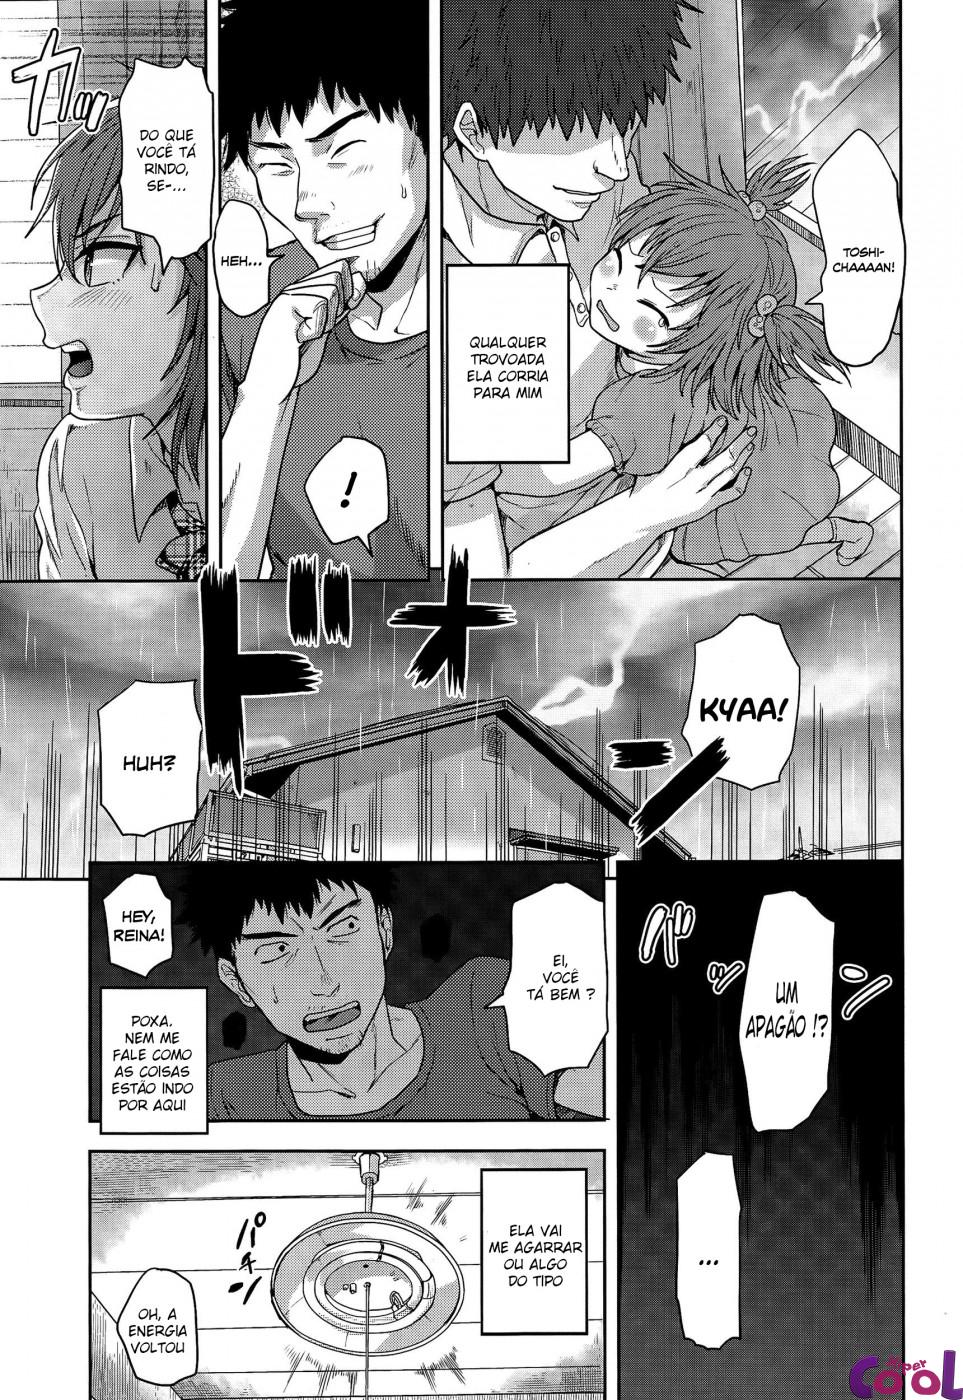 thunder-girl-chapter-01-page-6.jpg